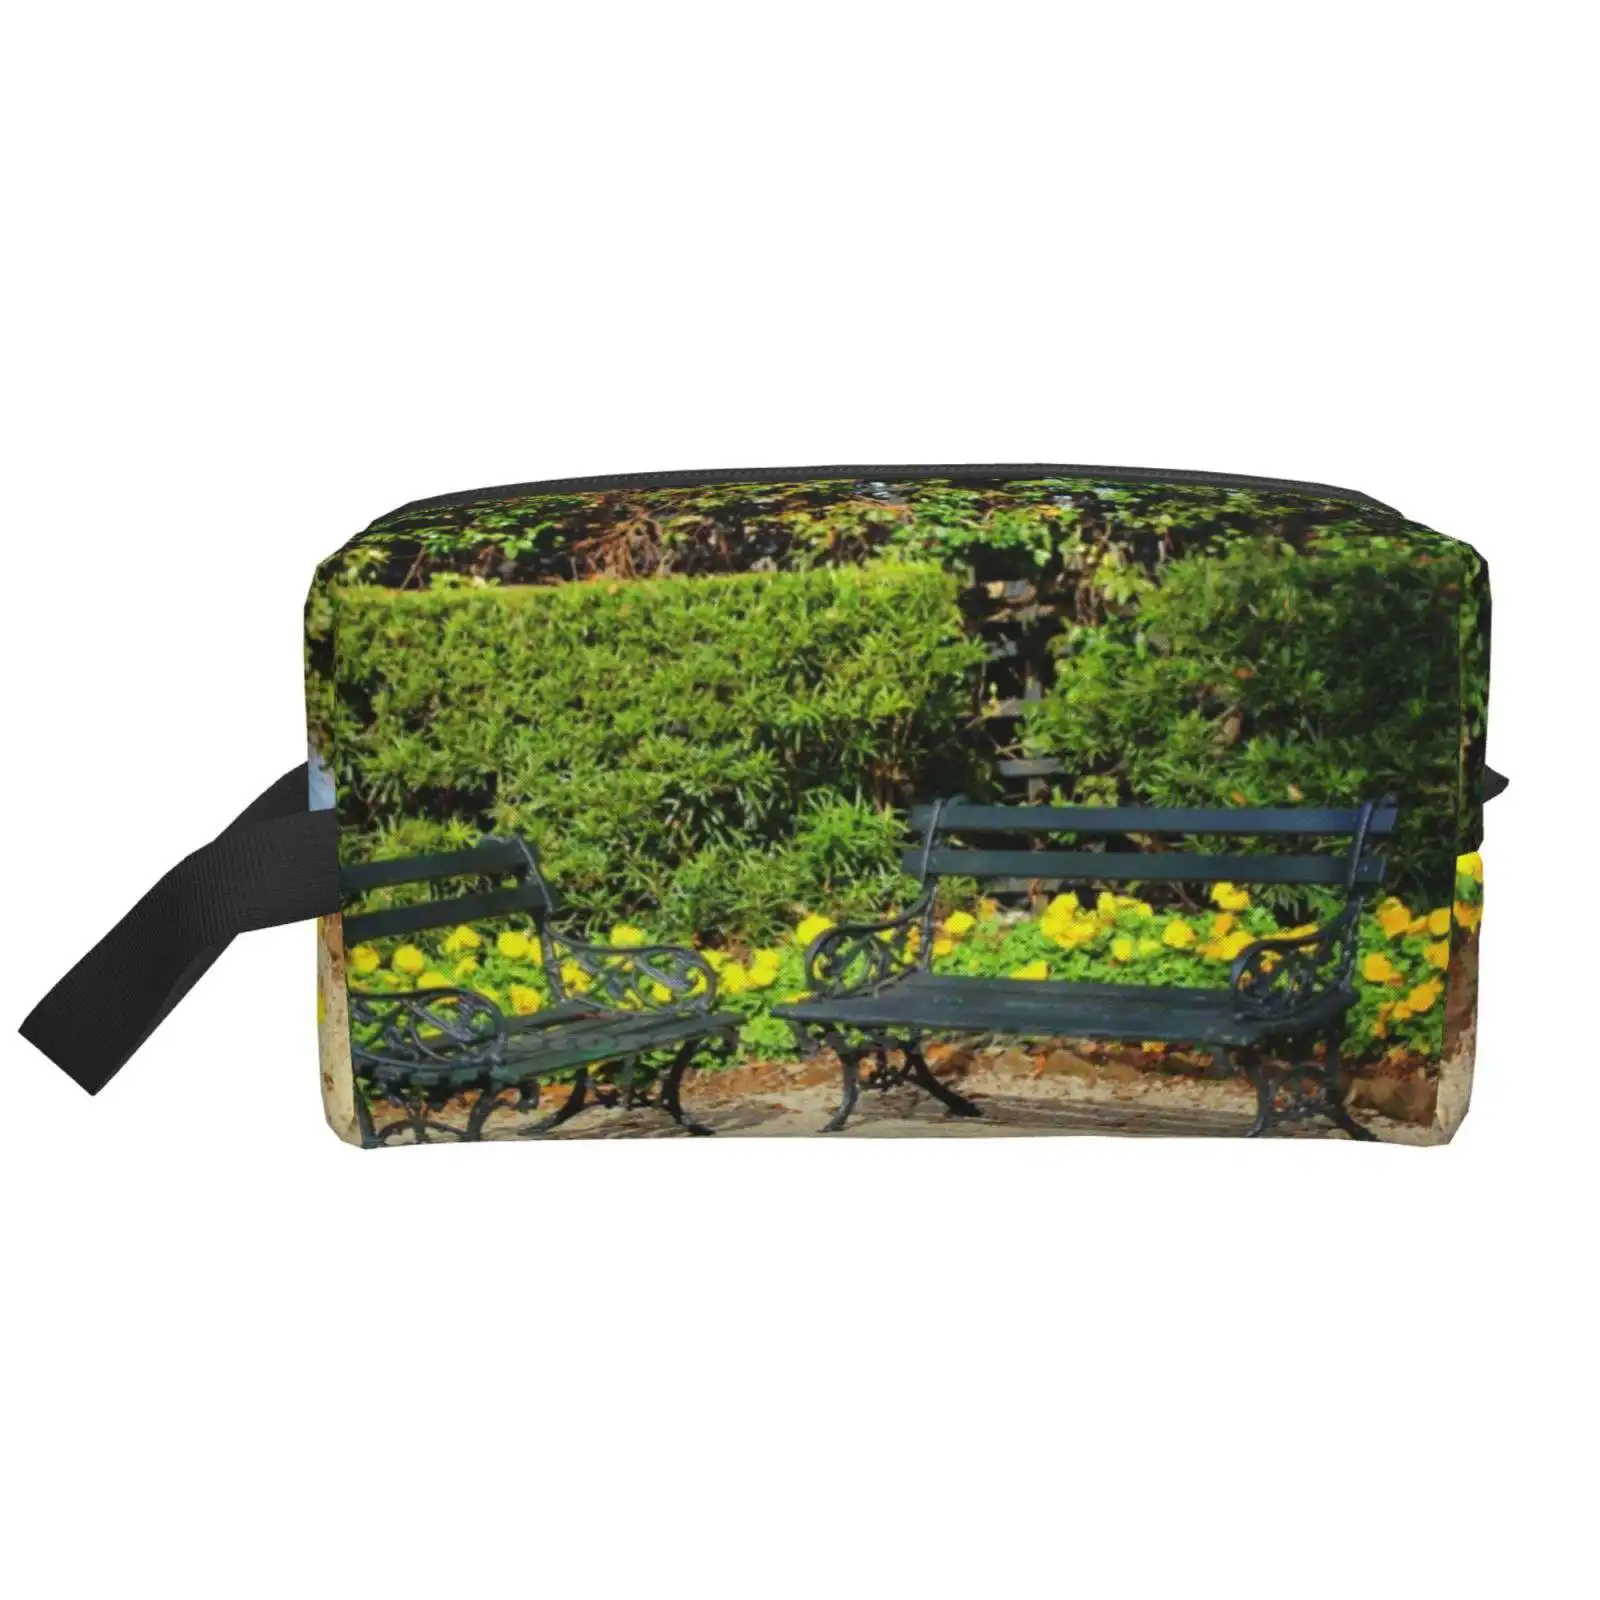 

Yellow Poppy Garden Travel Sport Storage Bags Large Size Yellow Flowers Poppy Poppies Flora Plant Bloom Blooming Blossom Fresh